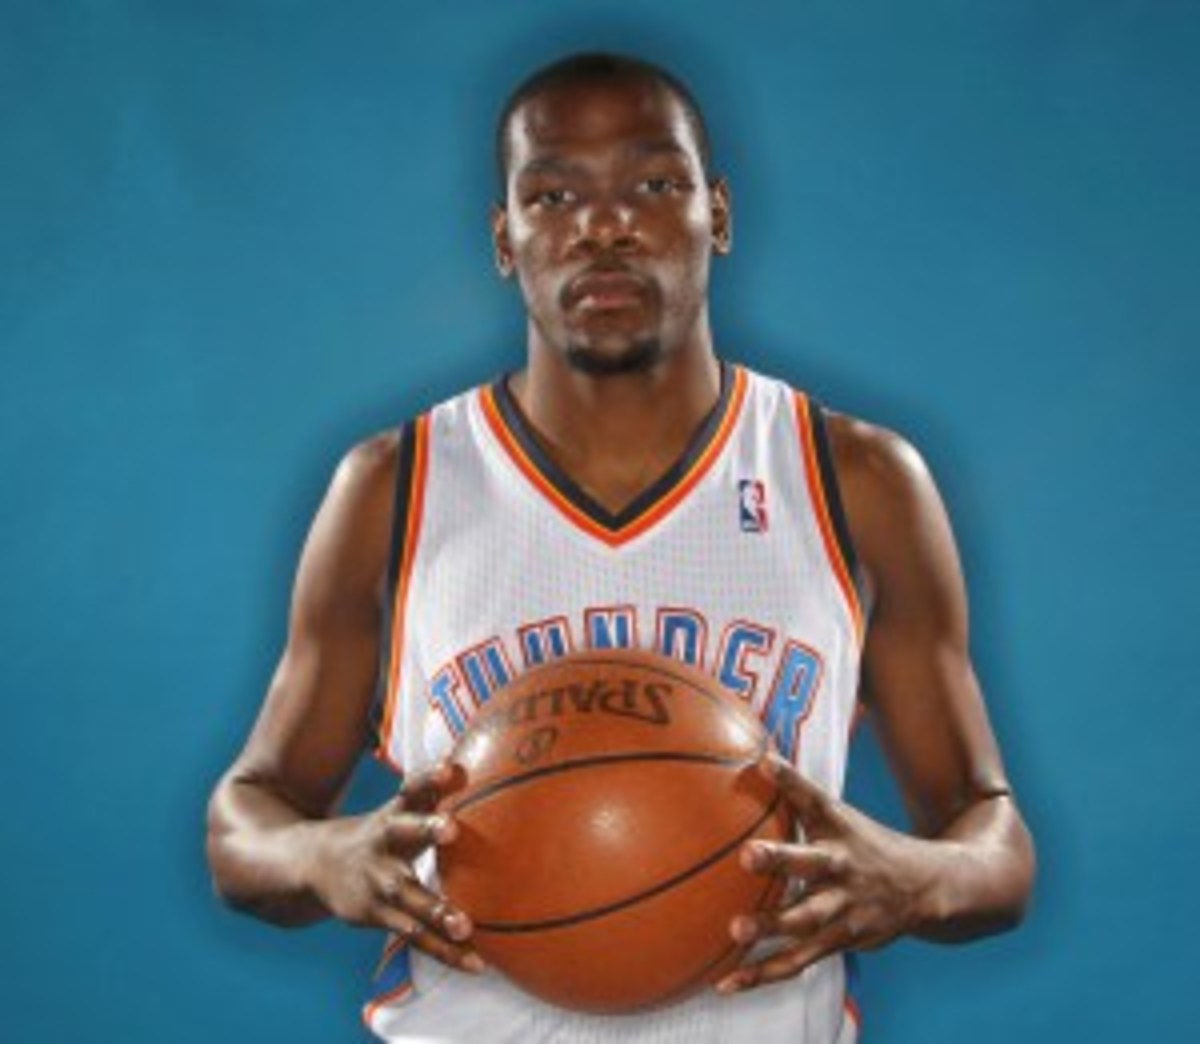 Kevin Durant to open restaurant in Oklahoma City in 2013.